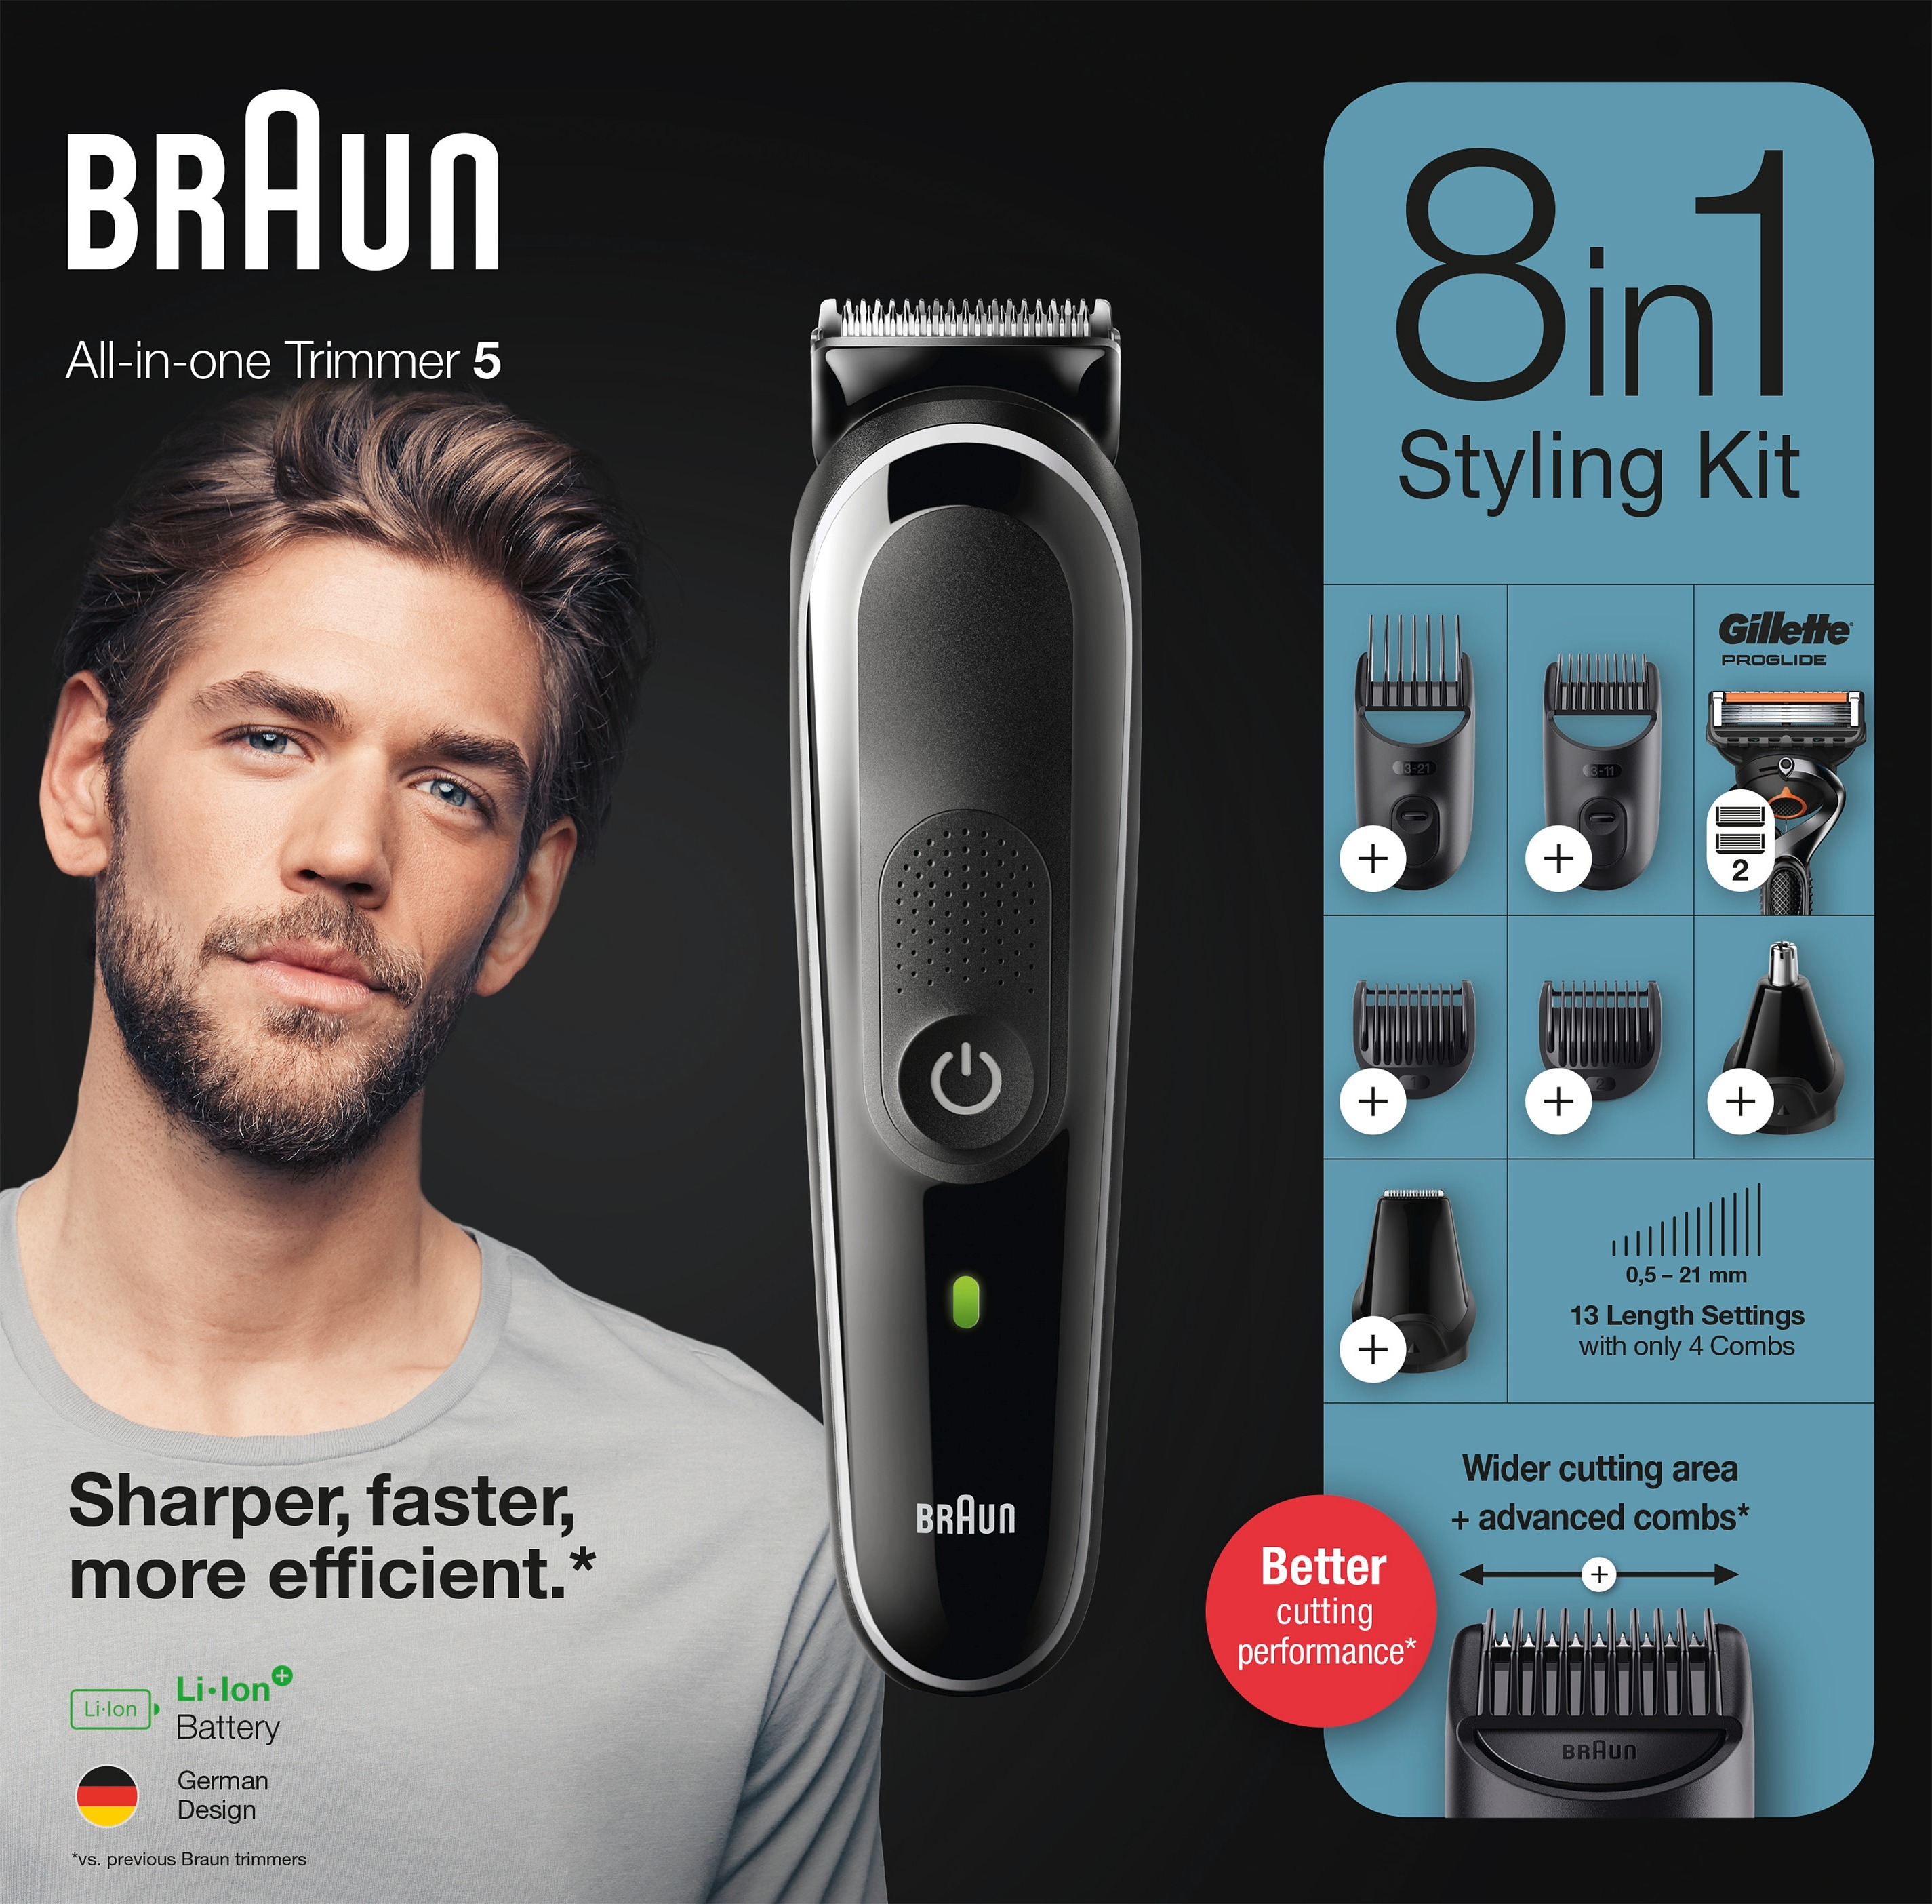 Braun All-in-one Trimmer 5  MGK5360 1 st